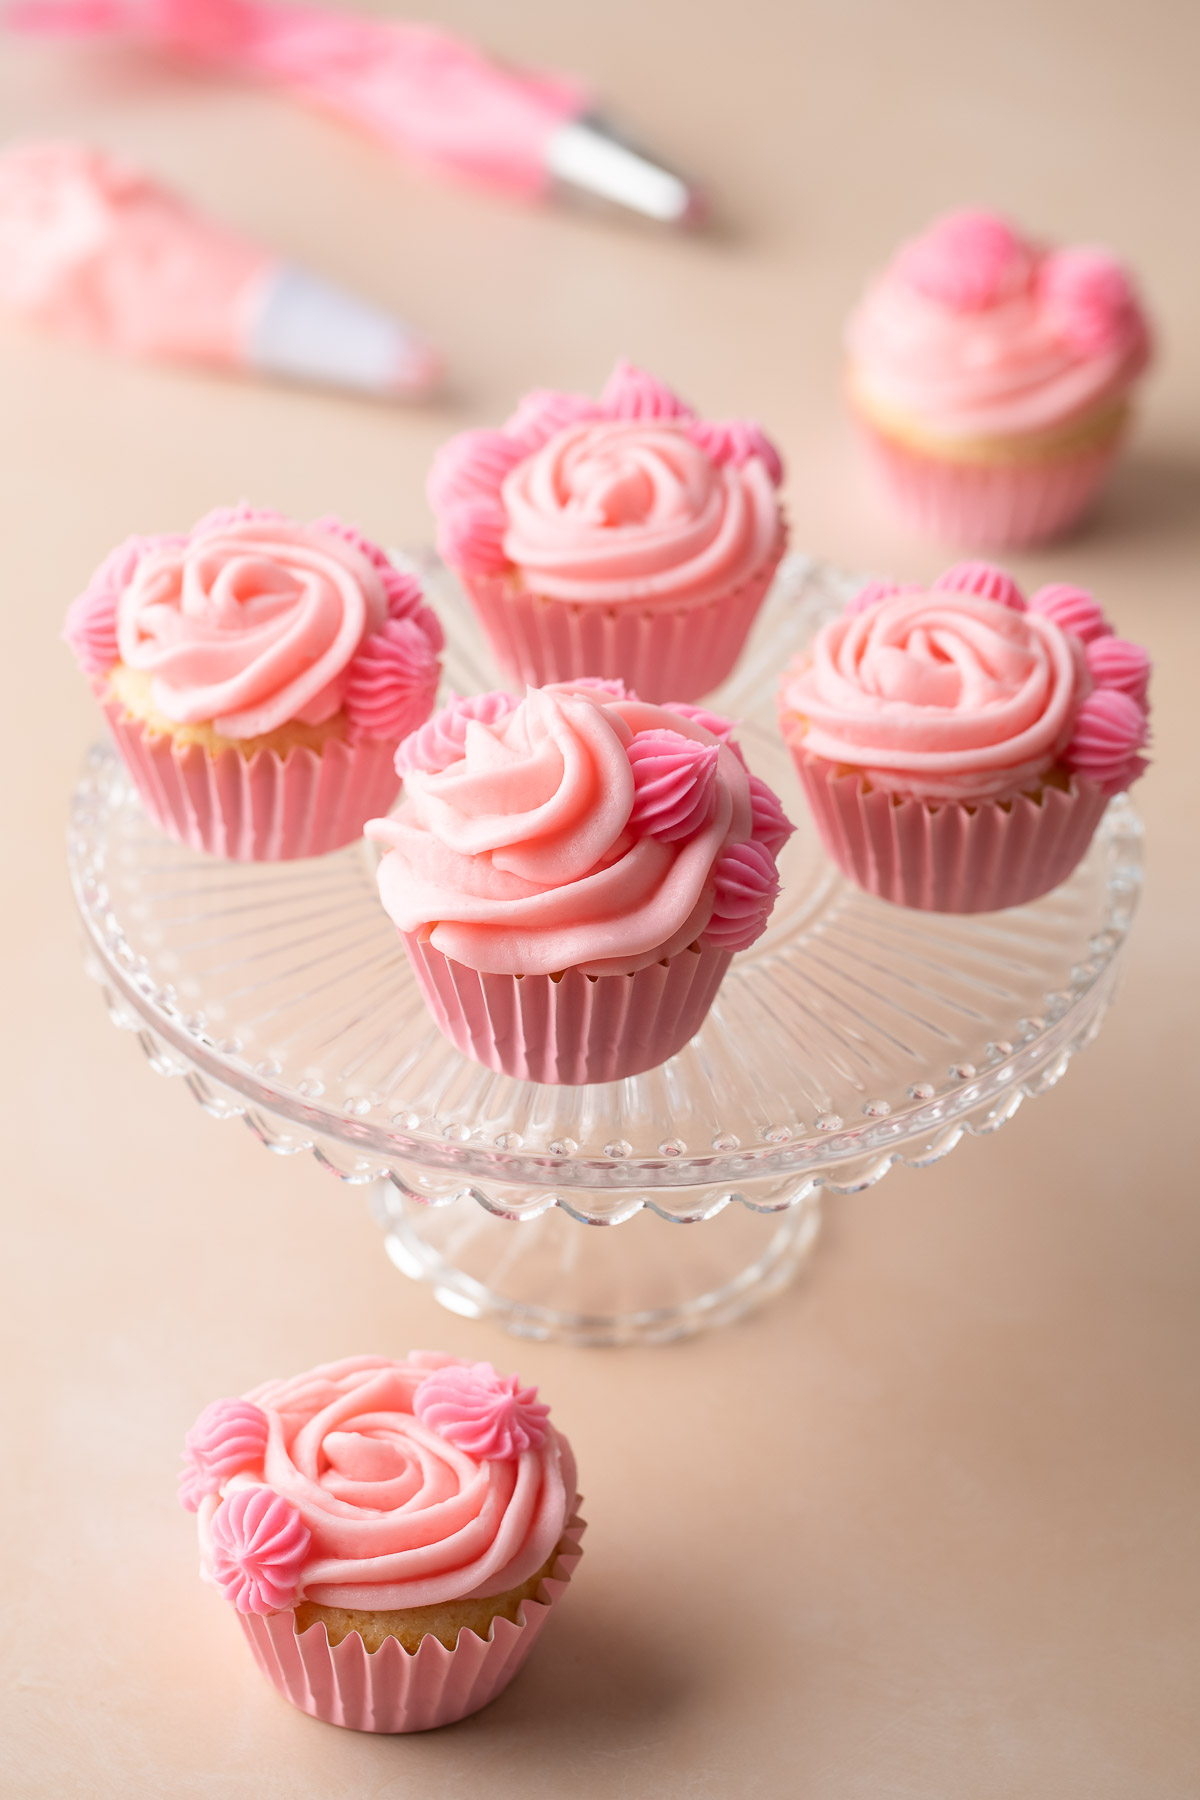 Valentine Cupcakes on Cake Stand with Pink Frosting